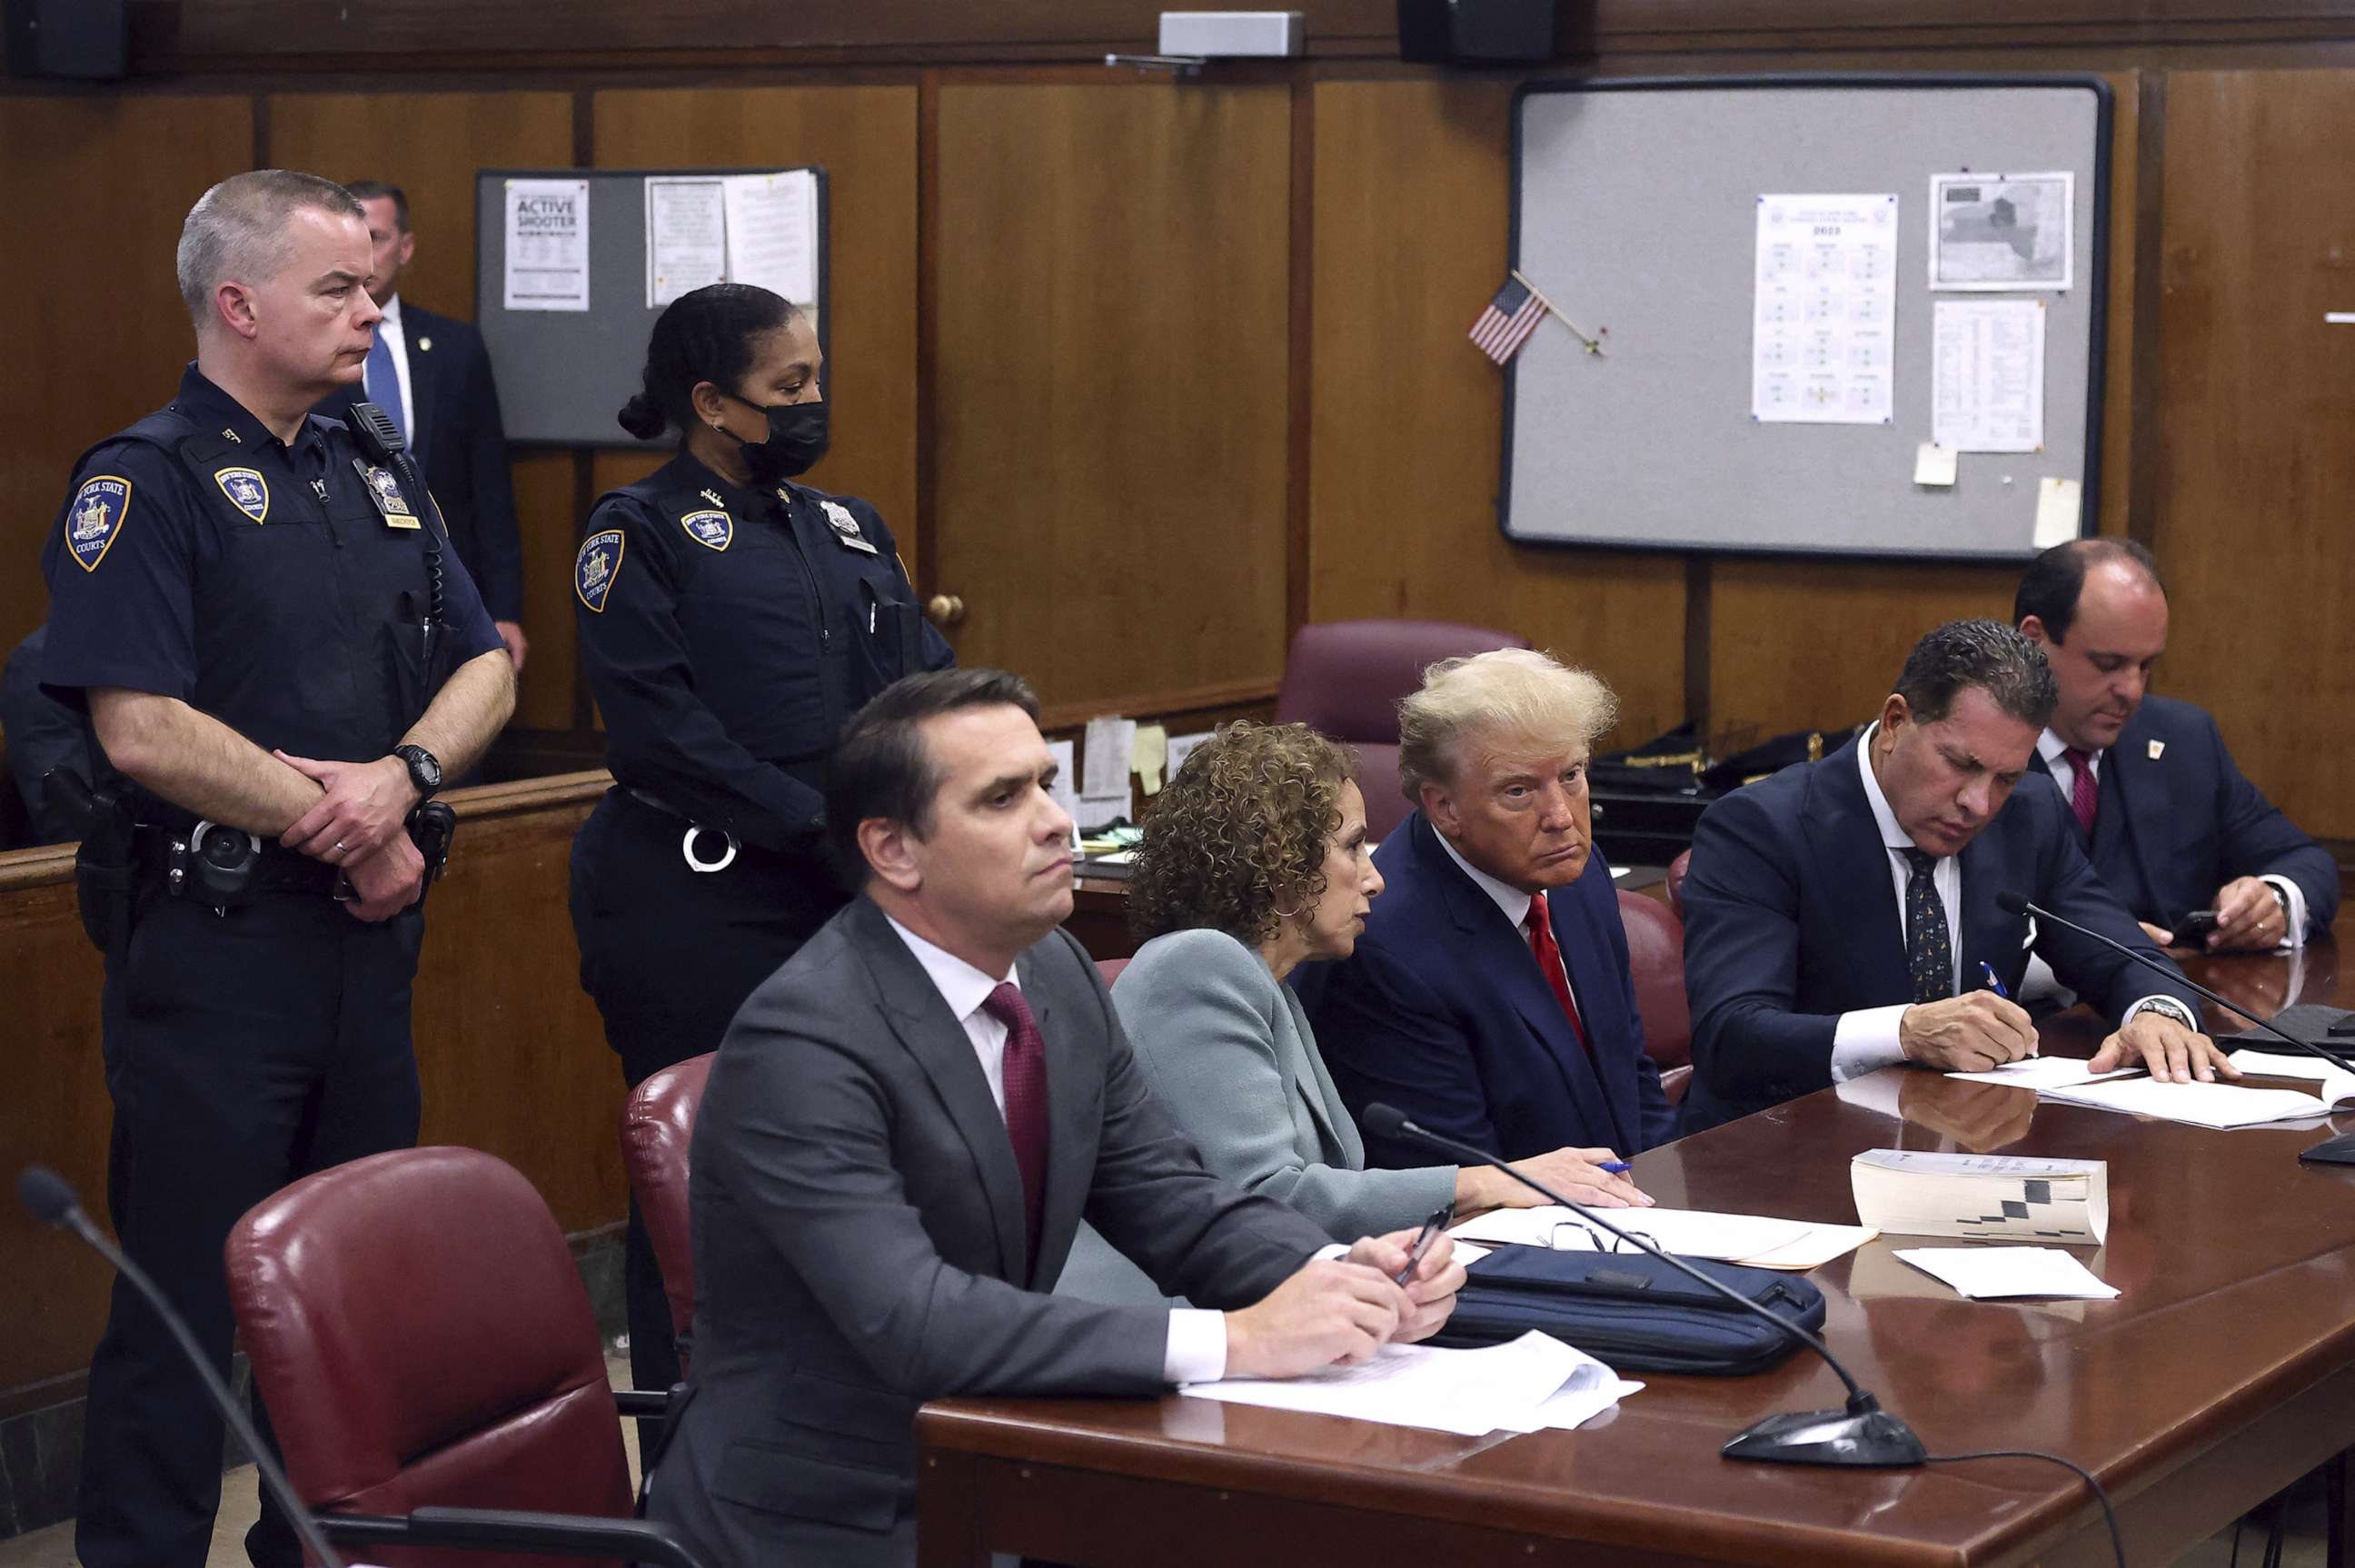 PHOTO: Former President Donald Trump appears in court with his legal team for an arraignment on charges stemming from his indictment by a Manhattan grand jury, in New York City, April 4, 2023.